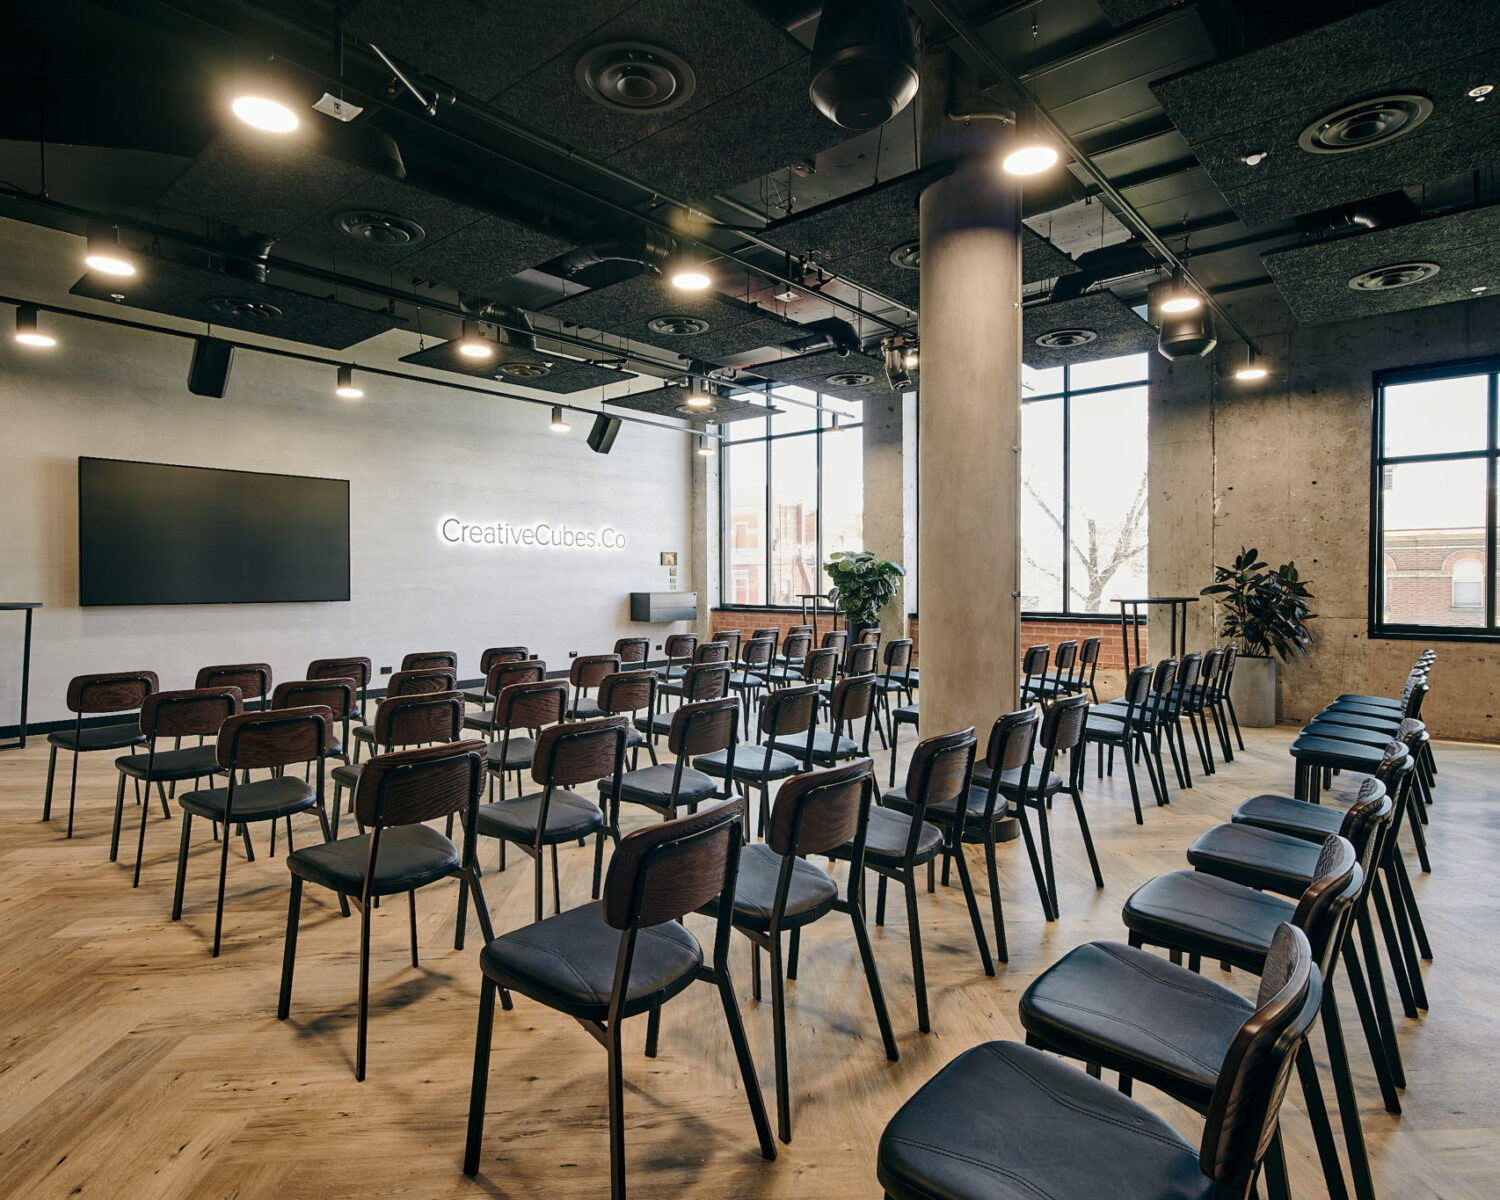 CreativeCubes.Co - Carlton VIC 3053 | Office Rental | Flexible Offices | For Lease | For Rent | Short Term Office | Coworking | Event Spaces | Venue Hire | Meeting Rooms | Lygon Street Carlton VIC00045